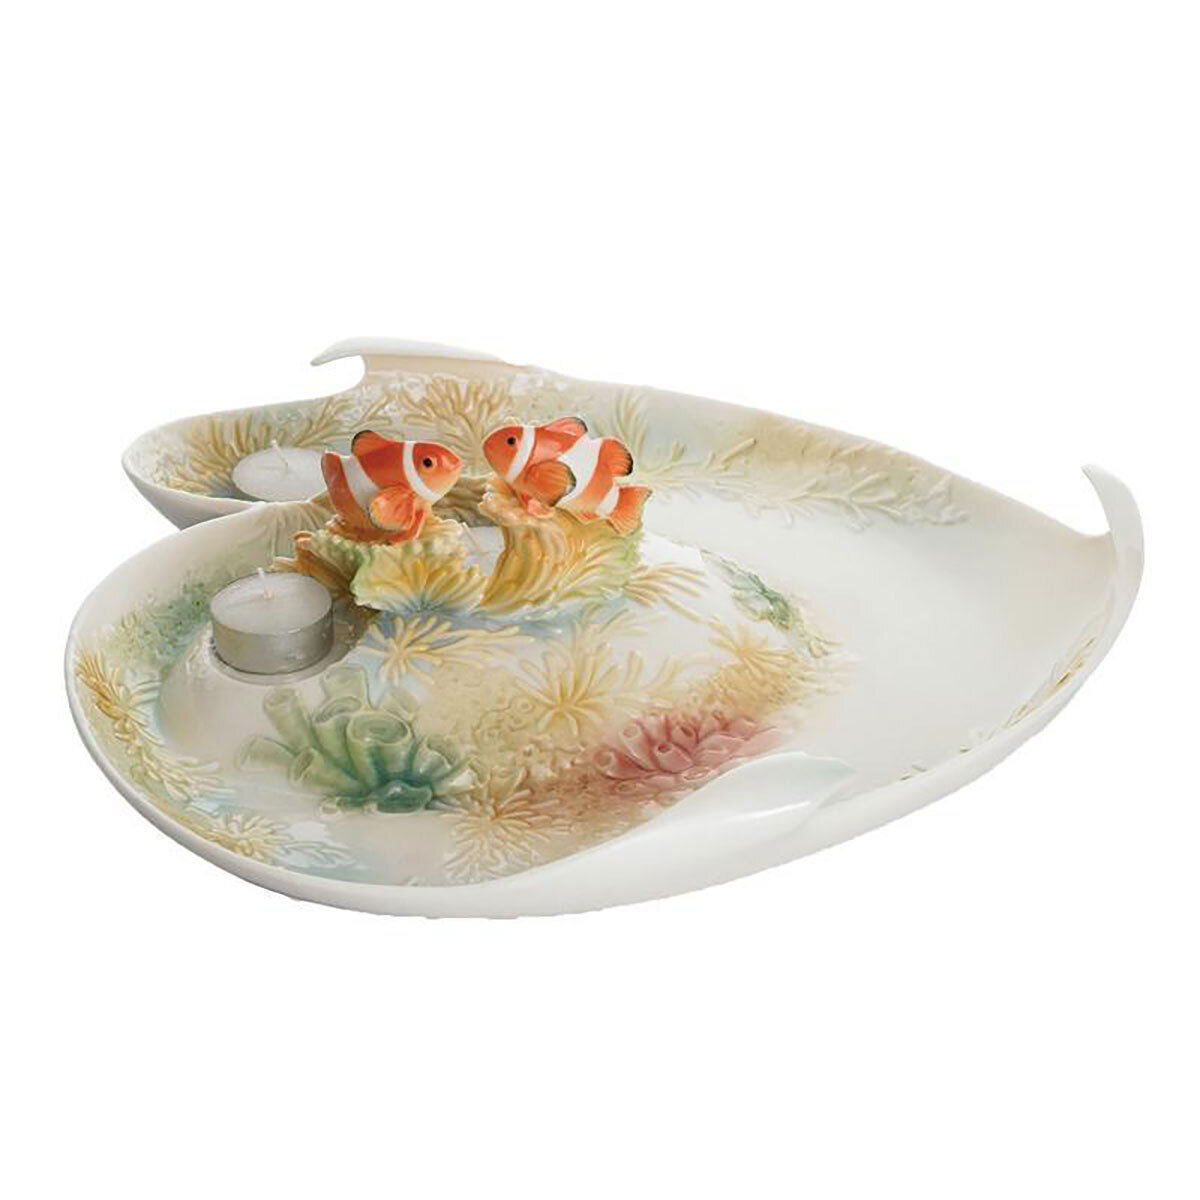 Franz Porcelain By The Sea Ornamental Table Decoration With Tealite Insert FZ01332